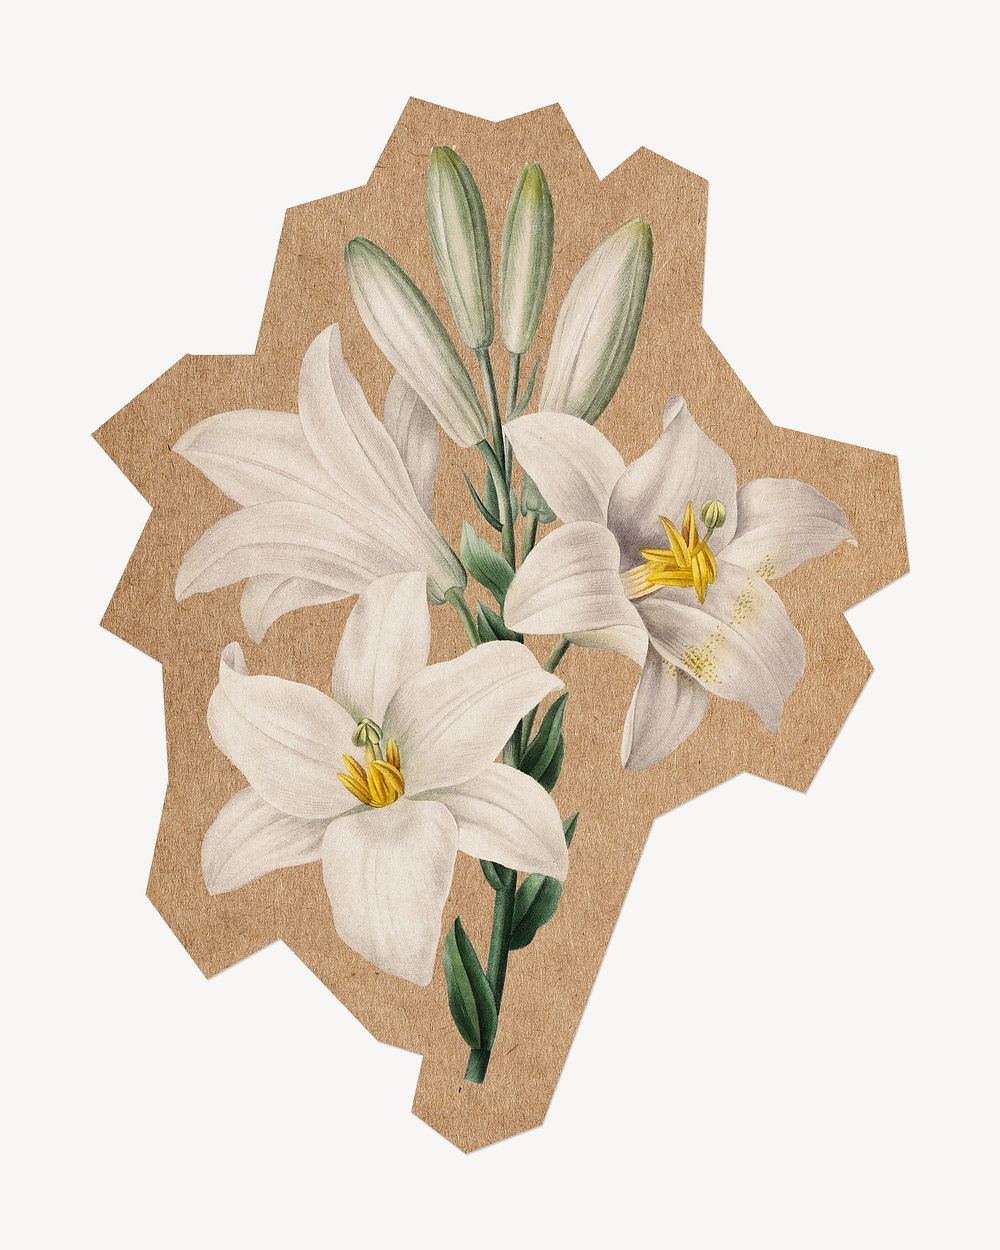 Png Madonna Lily, cut out paper element. Artwork from Pierre Joseph Redouté remixed by rawpixel.